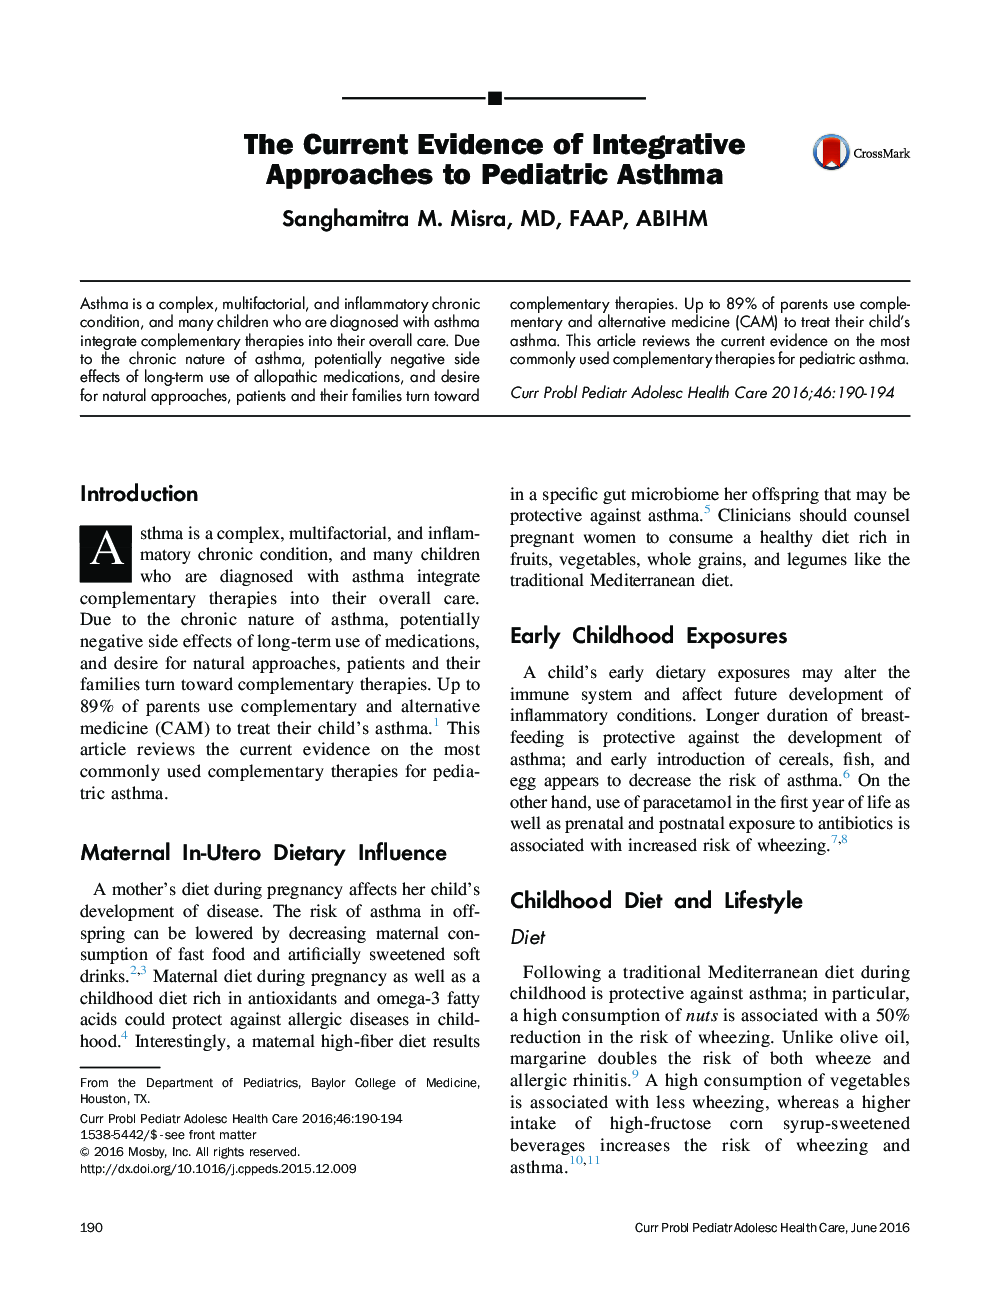 The Current Evidence of Integrative Approaches to Pediatric Asthma